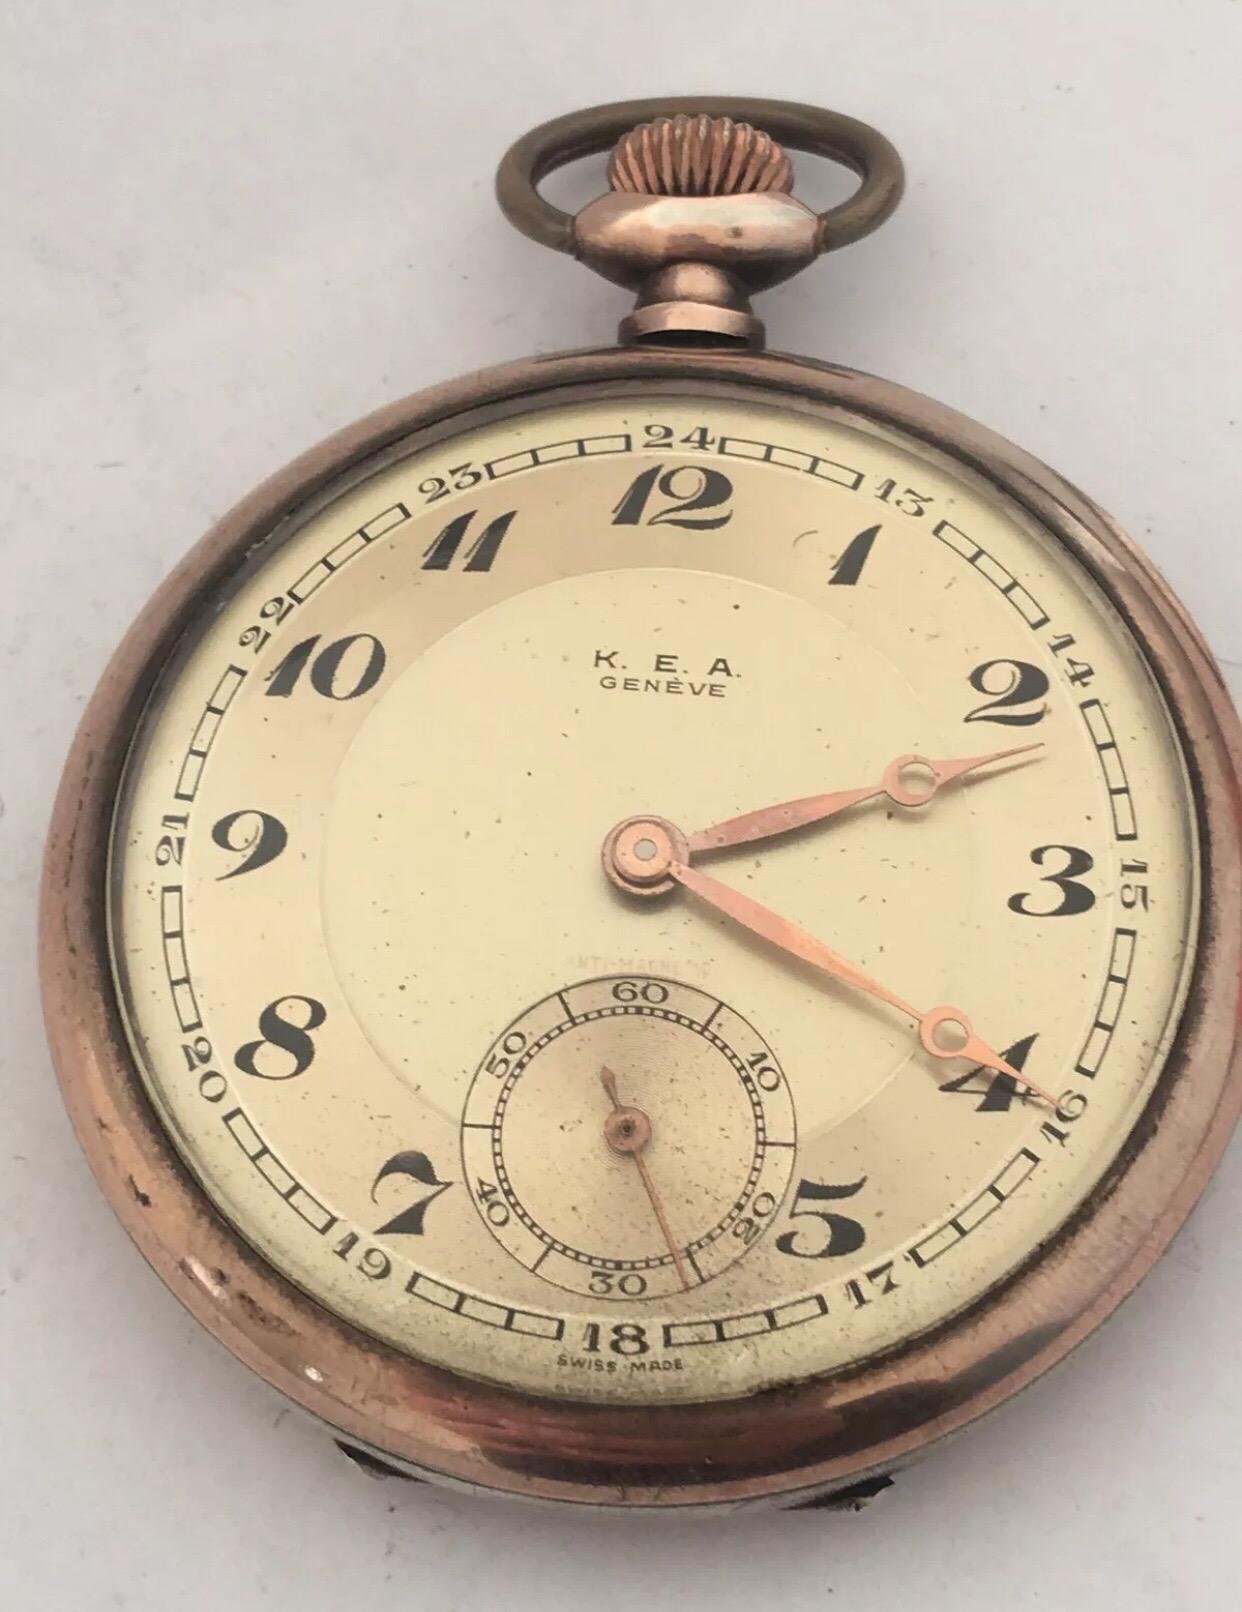 Antique Silver K. E. A. Geneve Pocket Watch For Sale 5